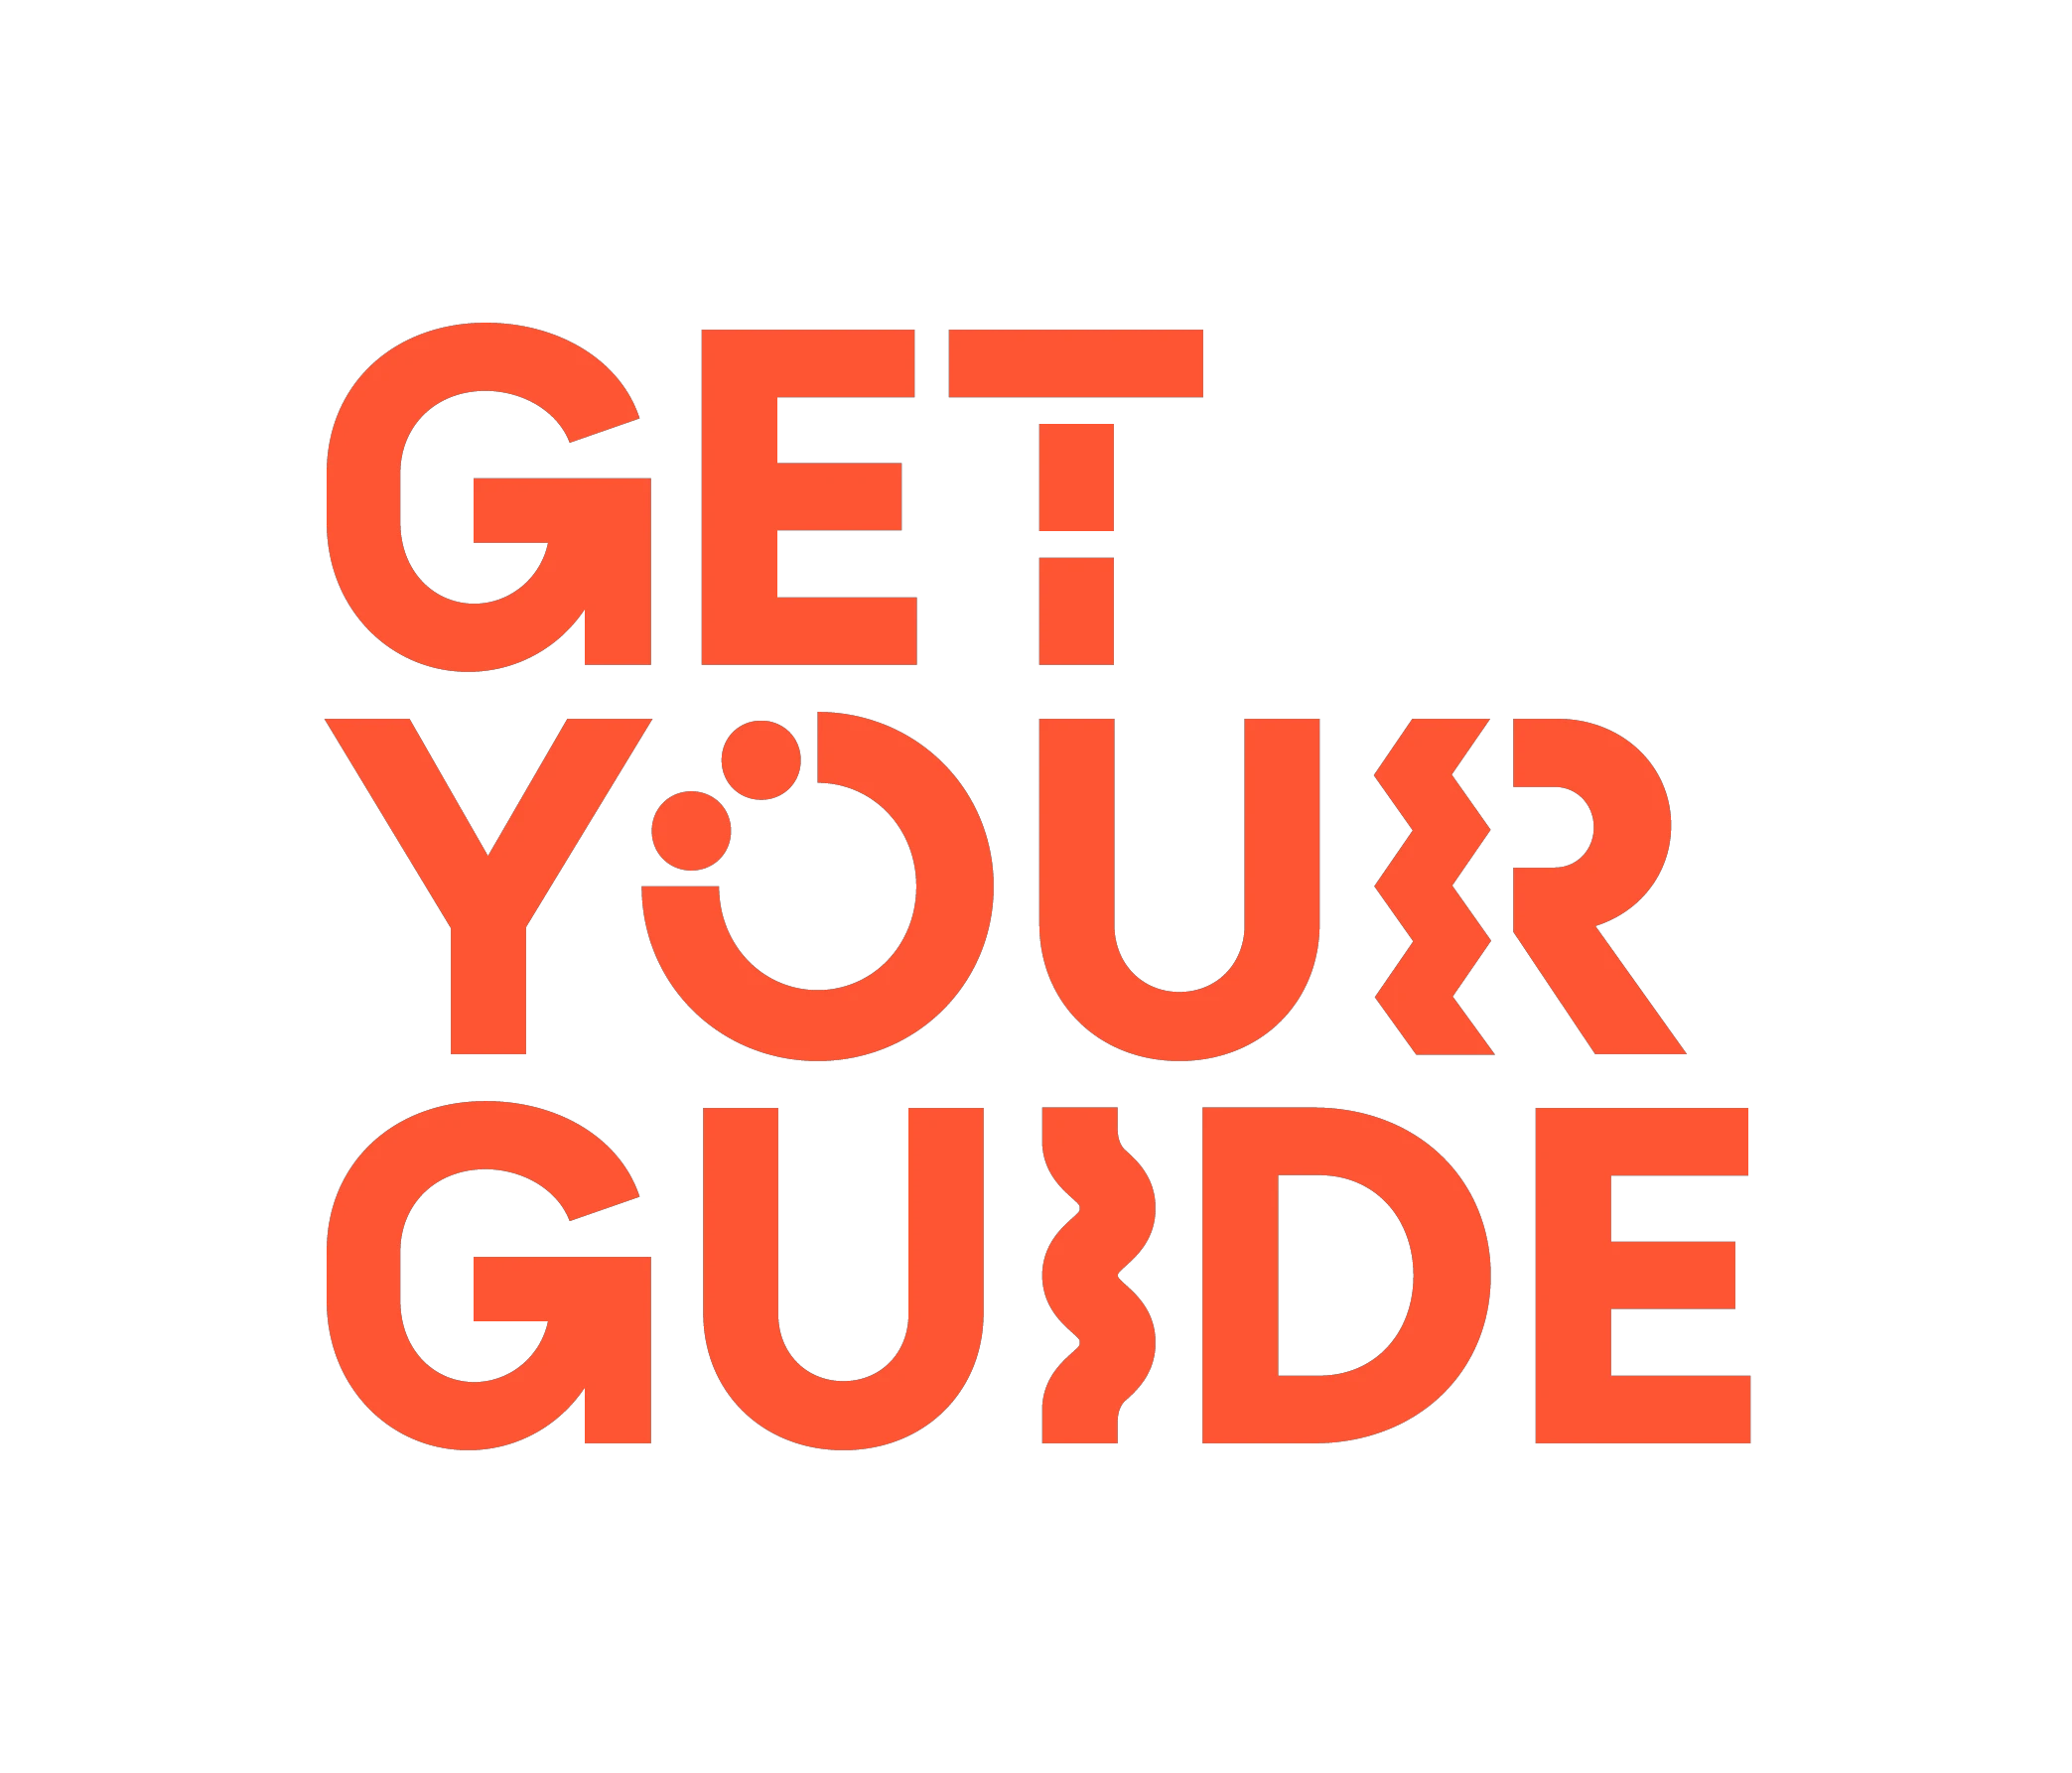  GetYourGuide Promo Codes